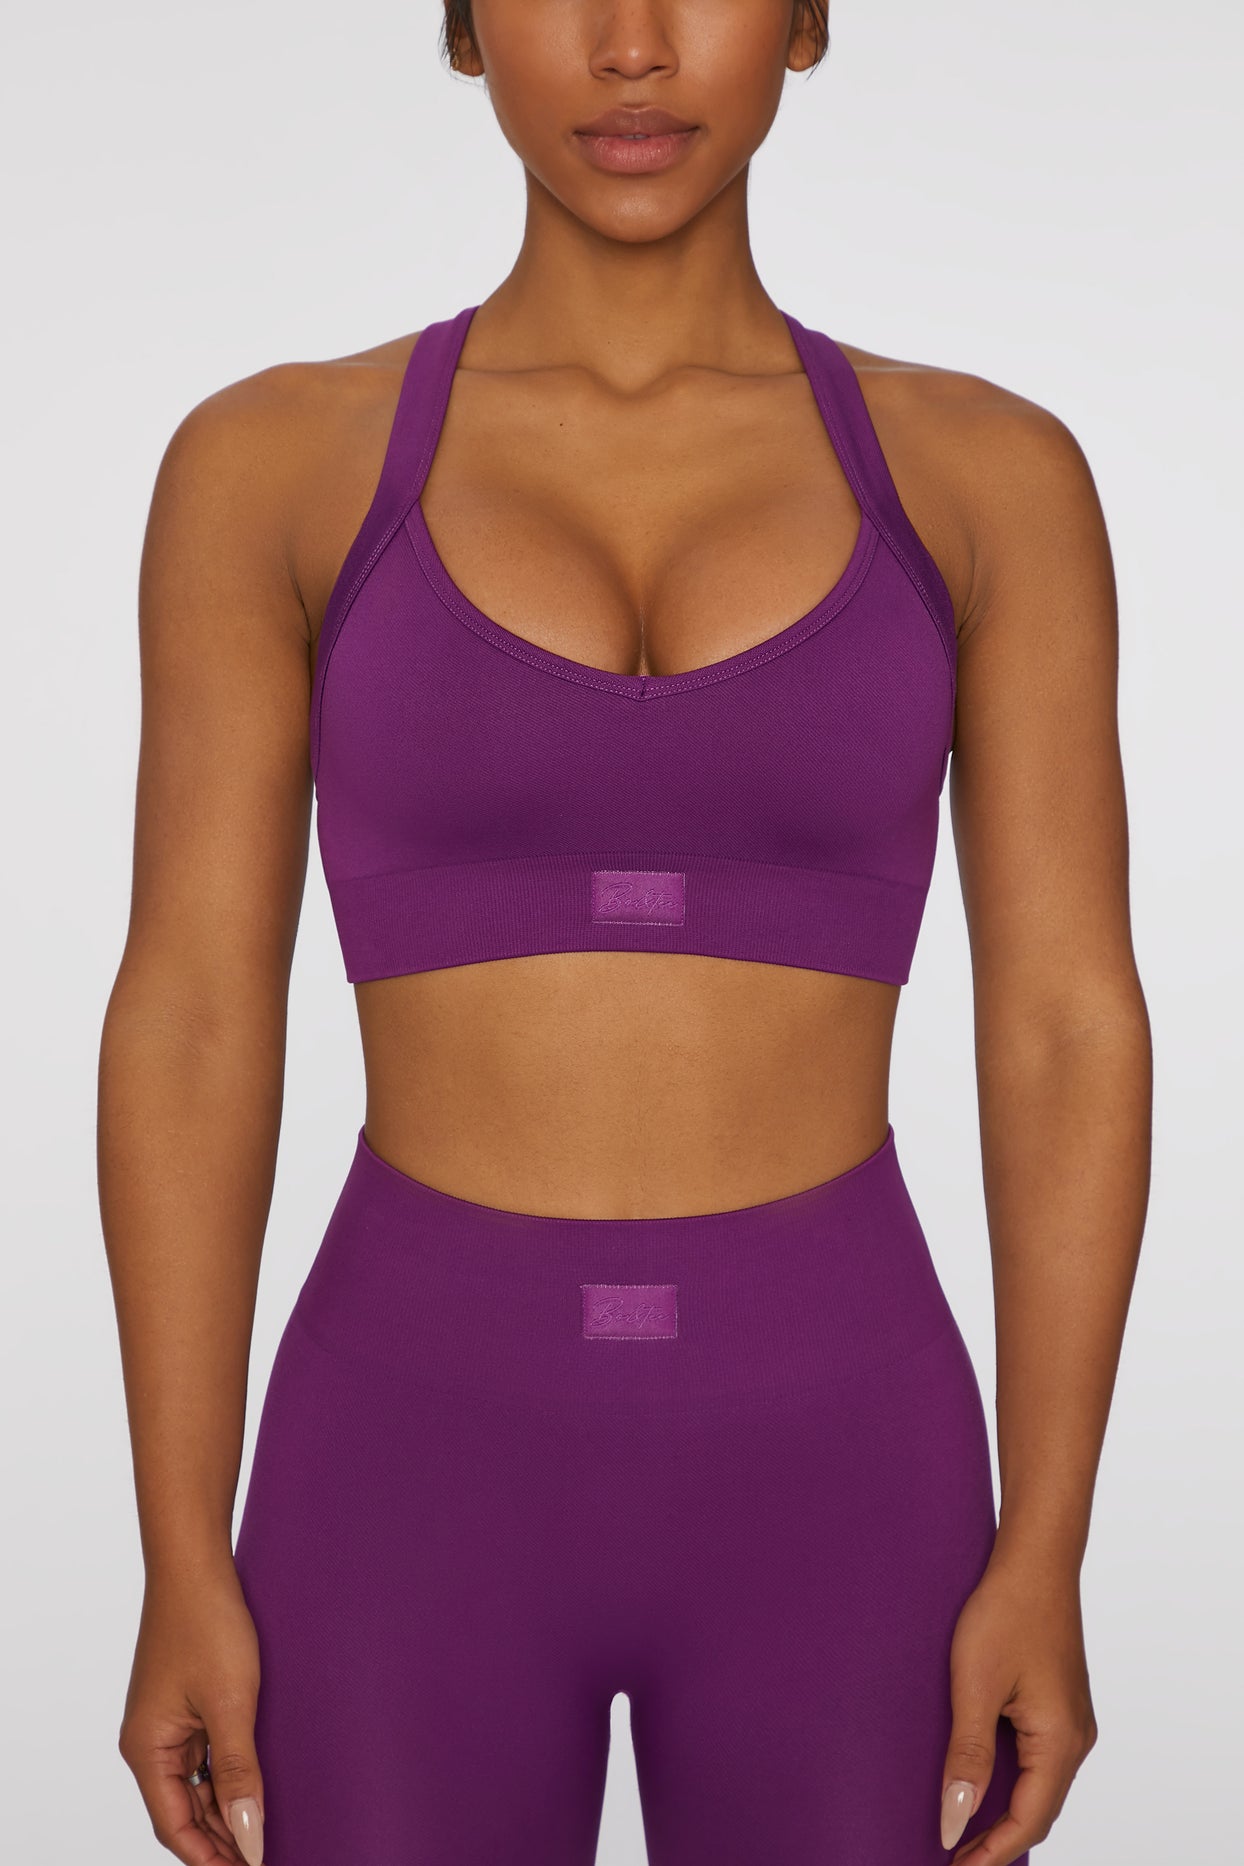 NZSALE  X by Gottex X By Gottex Women's Athletic Apparel Athletic Bra -  Color: Dark Blossom